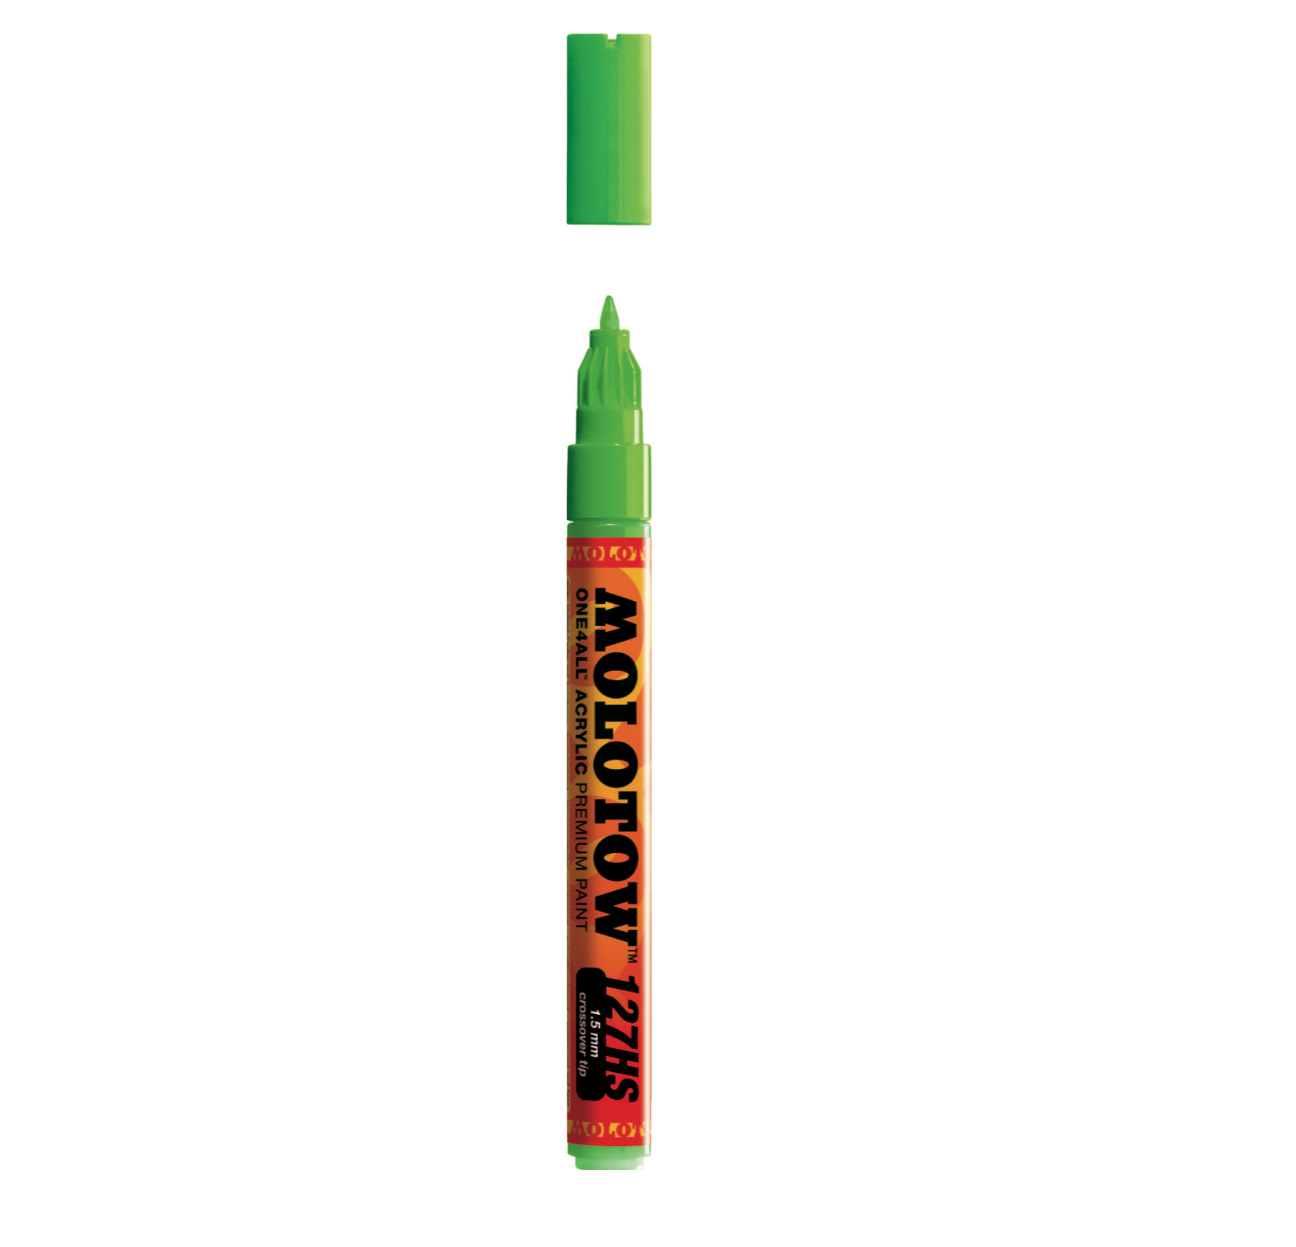 Molotow Co Tip 1.5Mm Neon Grn Fluo Paint Mrkr